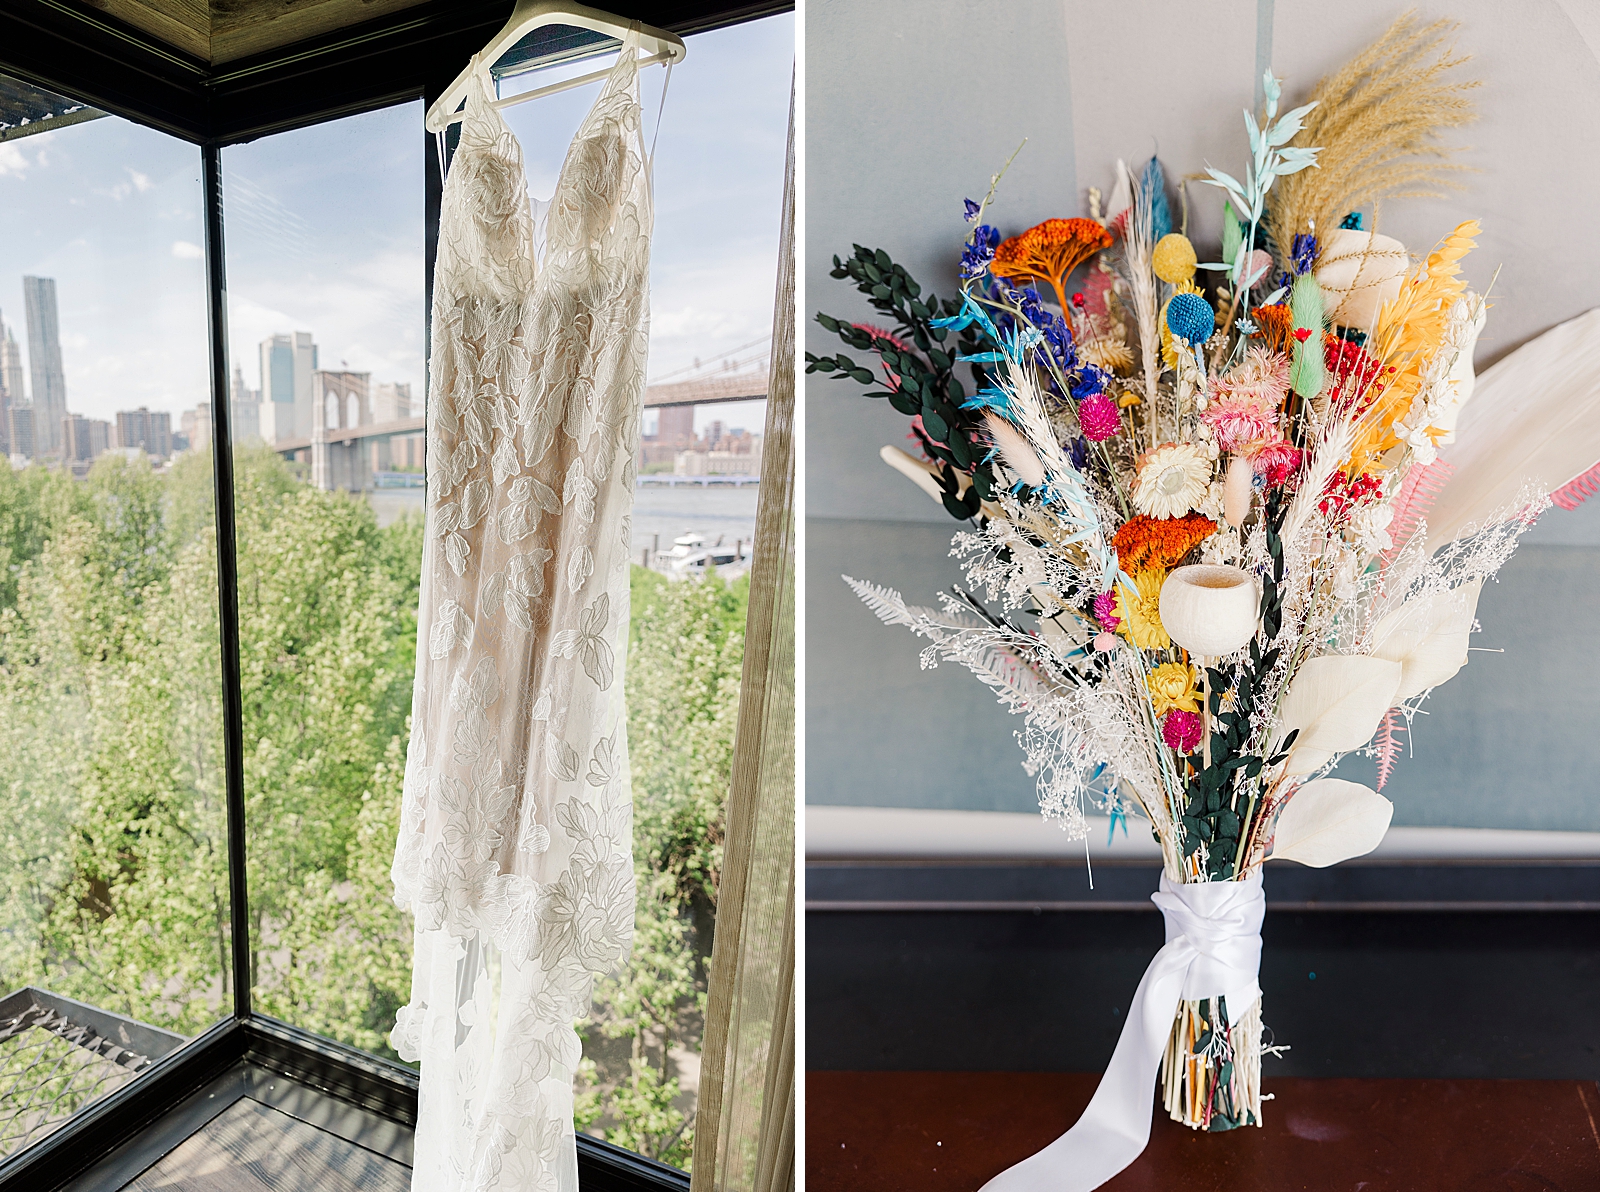 Left: Photo of MK's wedding gown hanging in front of a window.
Right: Photo of MK's colorful bouquet. 